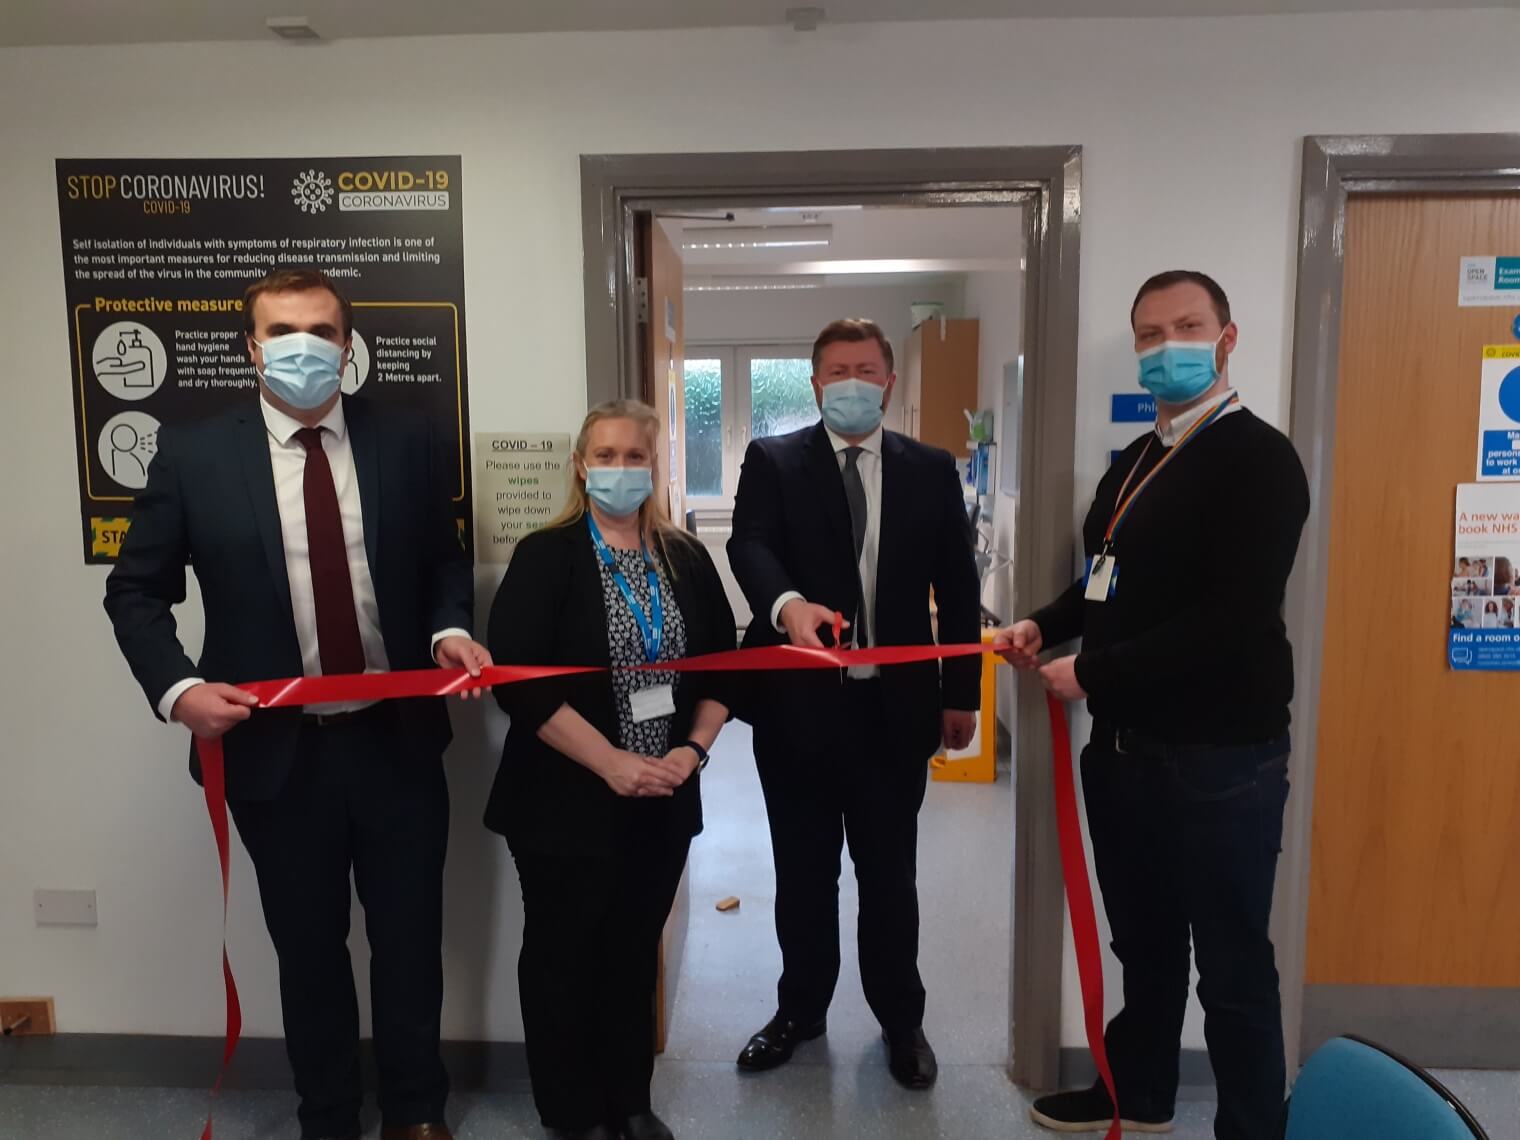 3 men and 1 woman ribbon cutting at Churchtown Health Centre